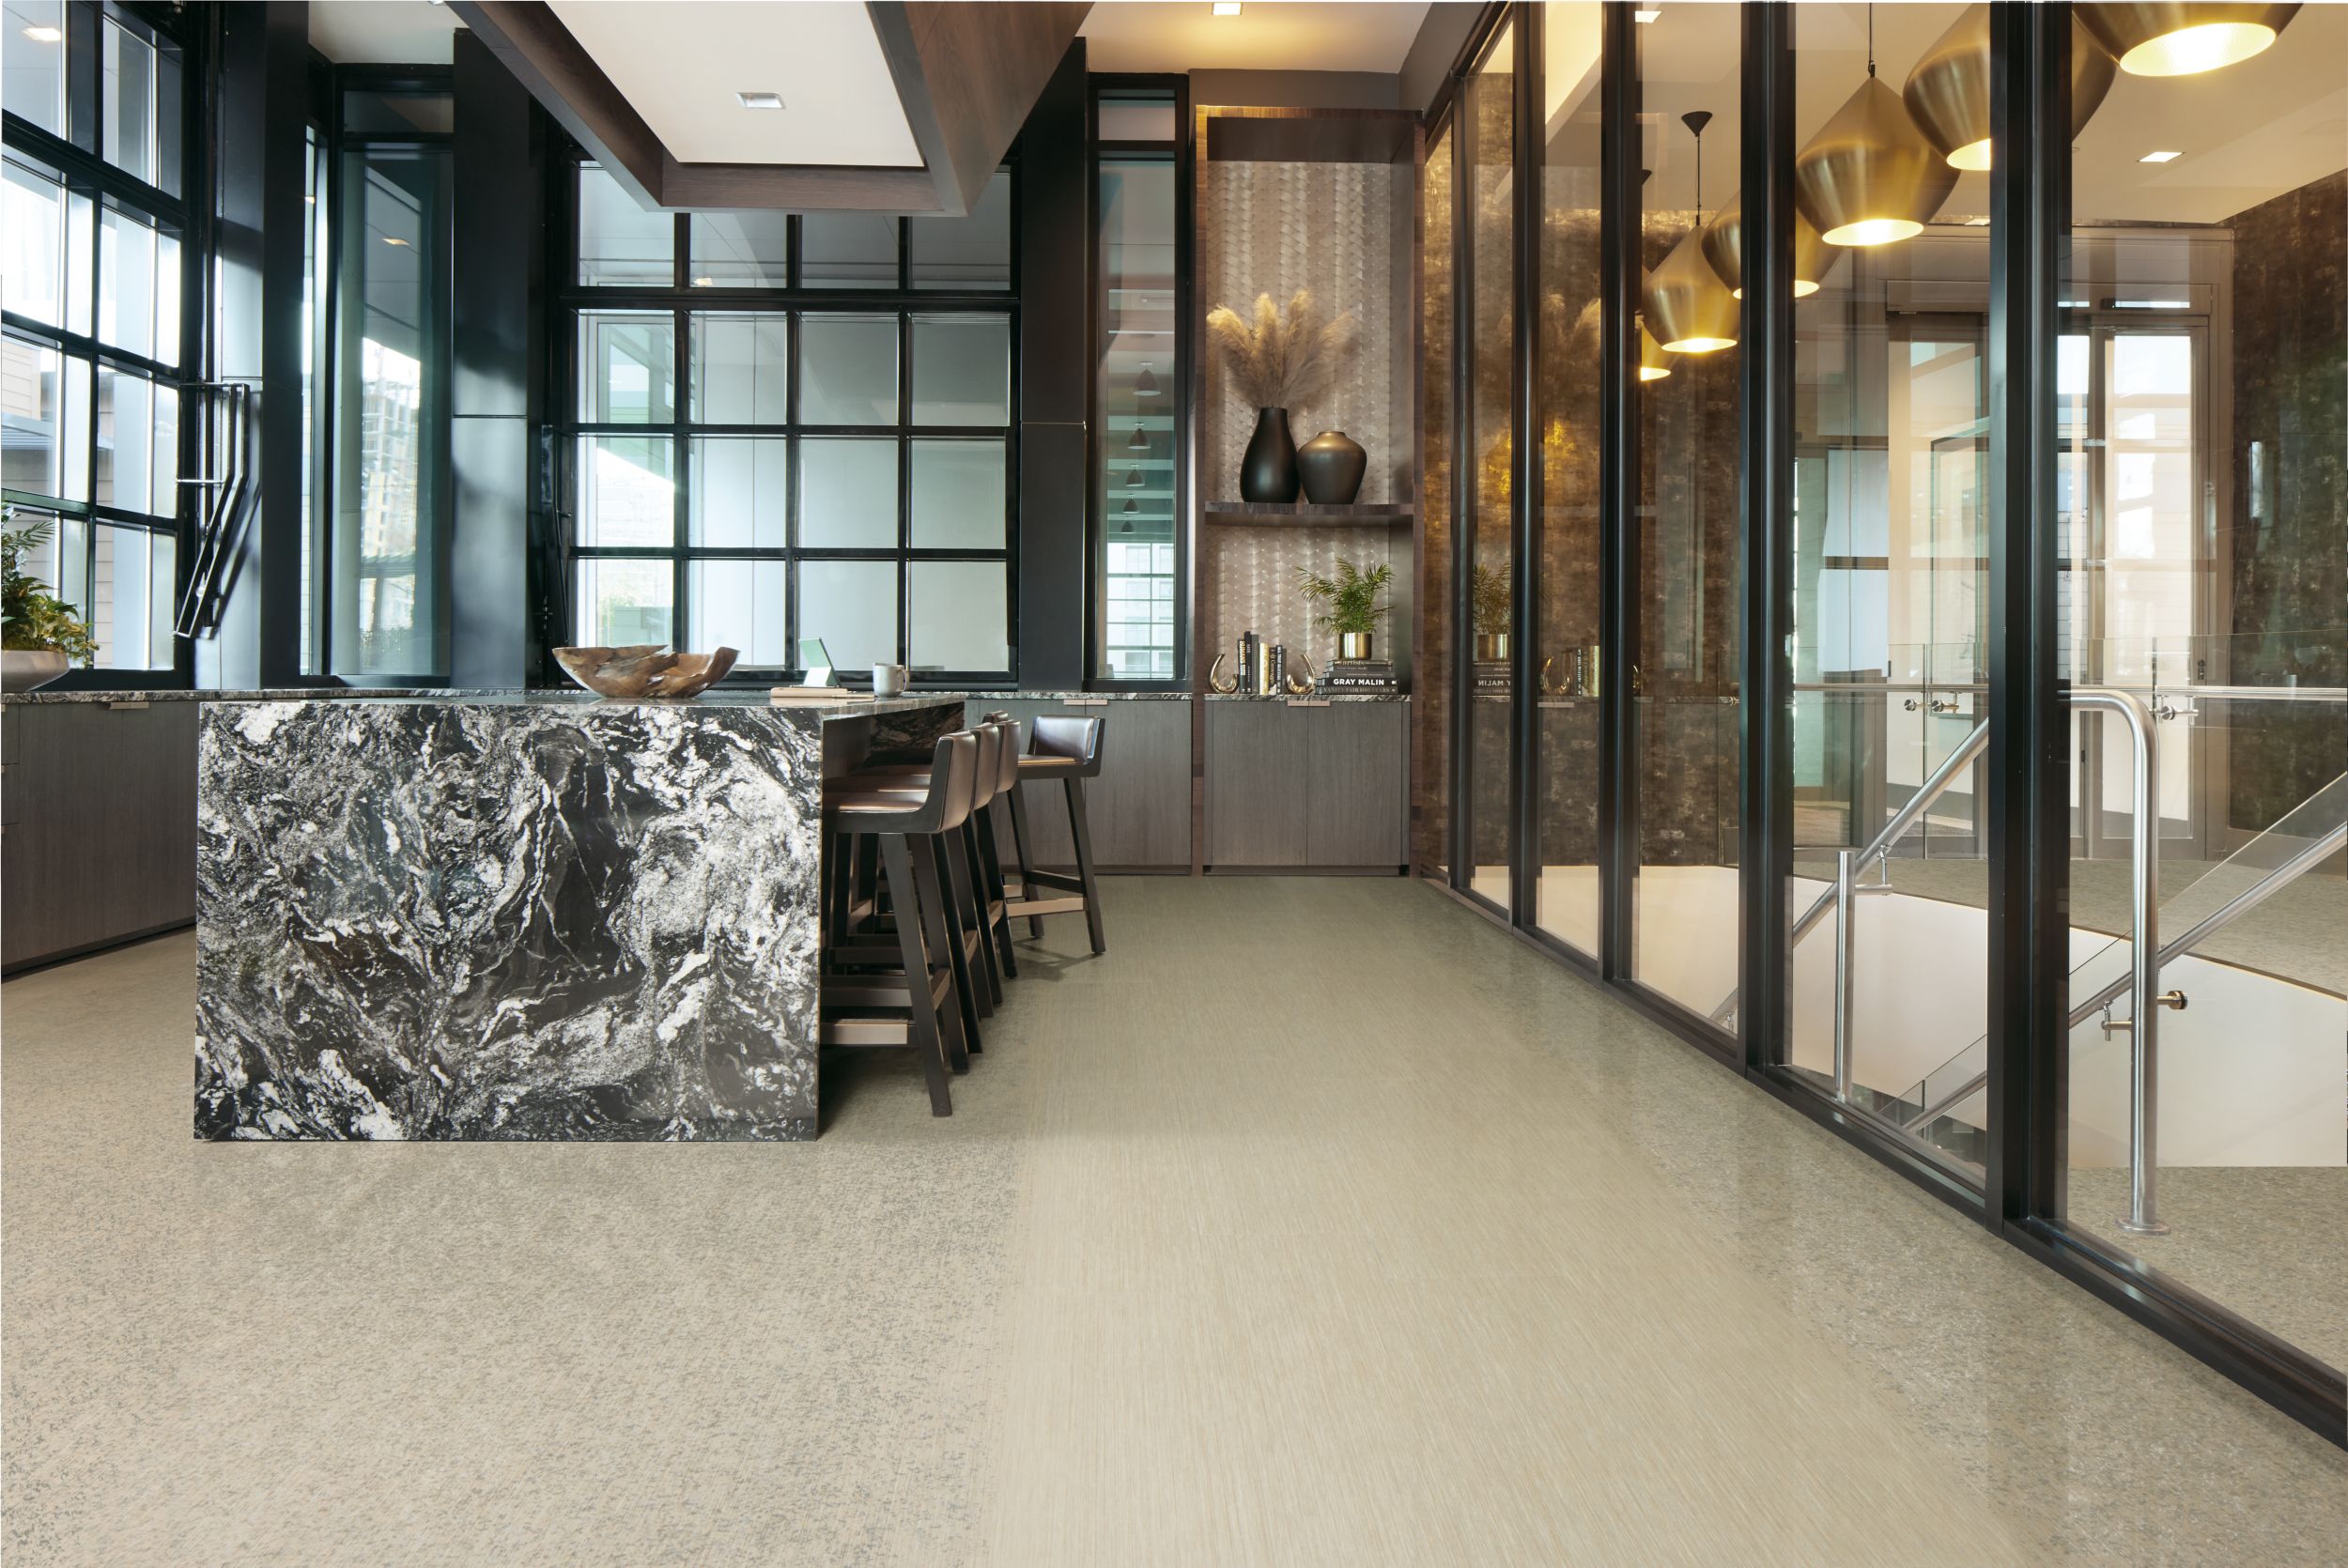 Interface Dither Silk LVT with Silk Age LVT and Shantung LVT in  a dining area image number 7